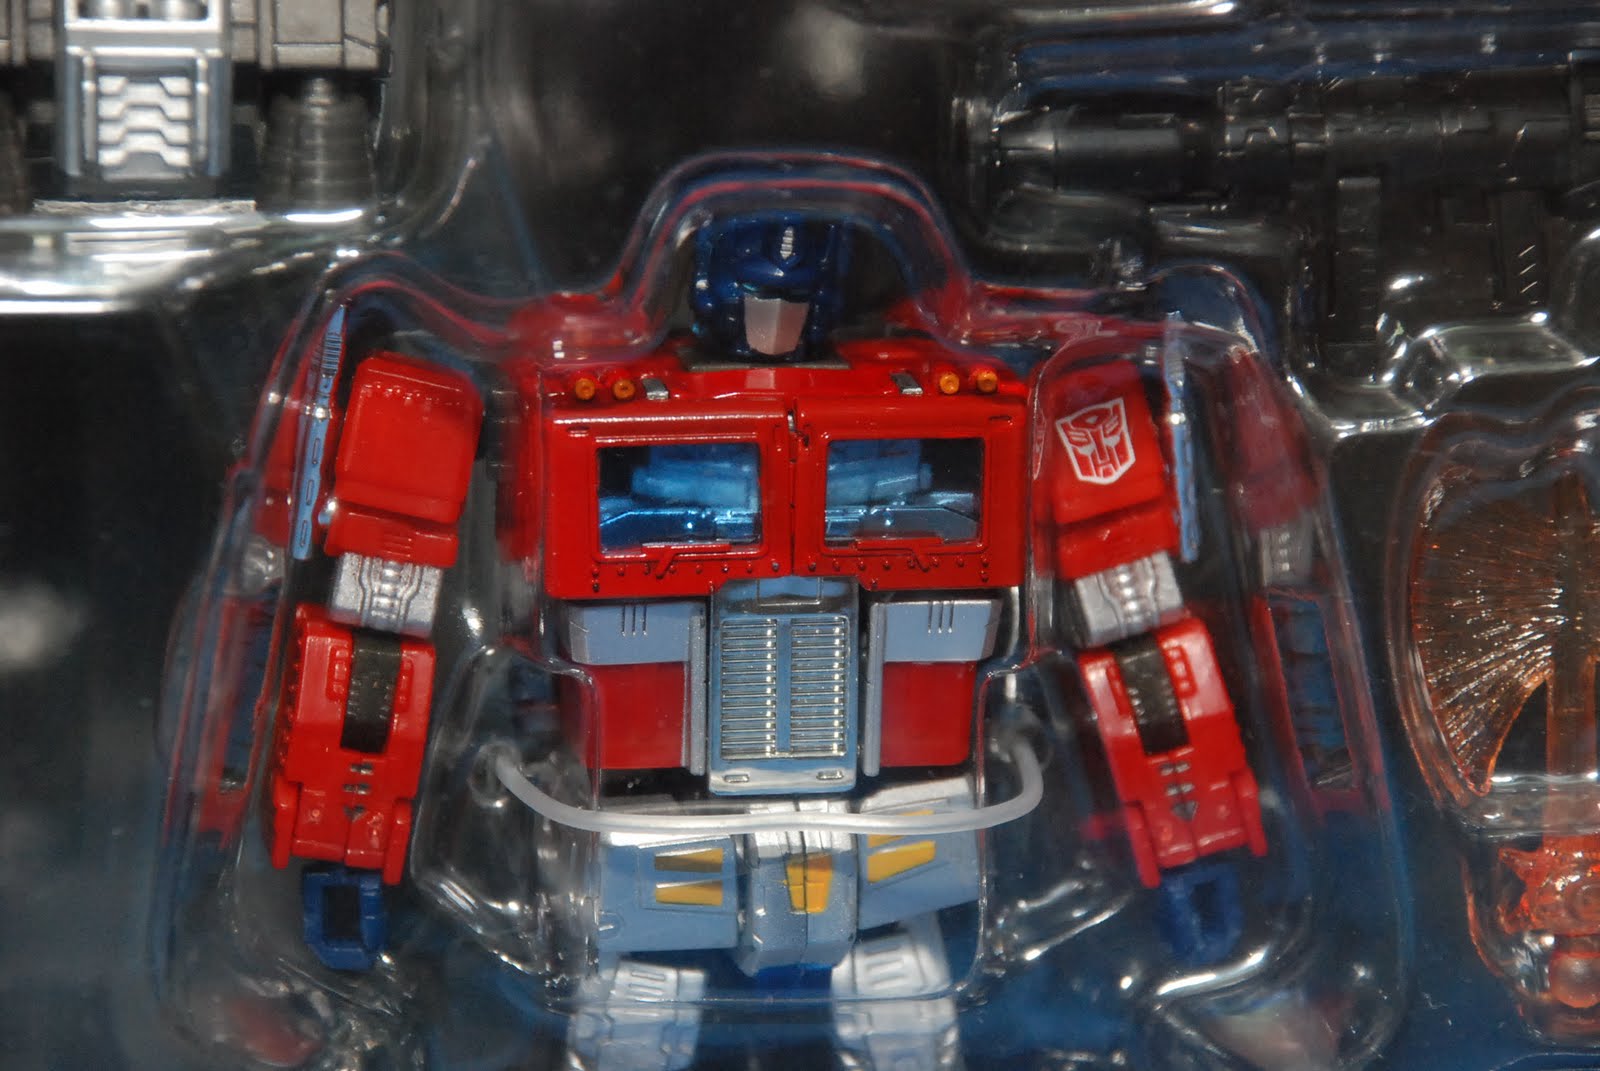 Used Transformer Toys 43